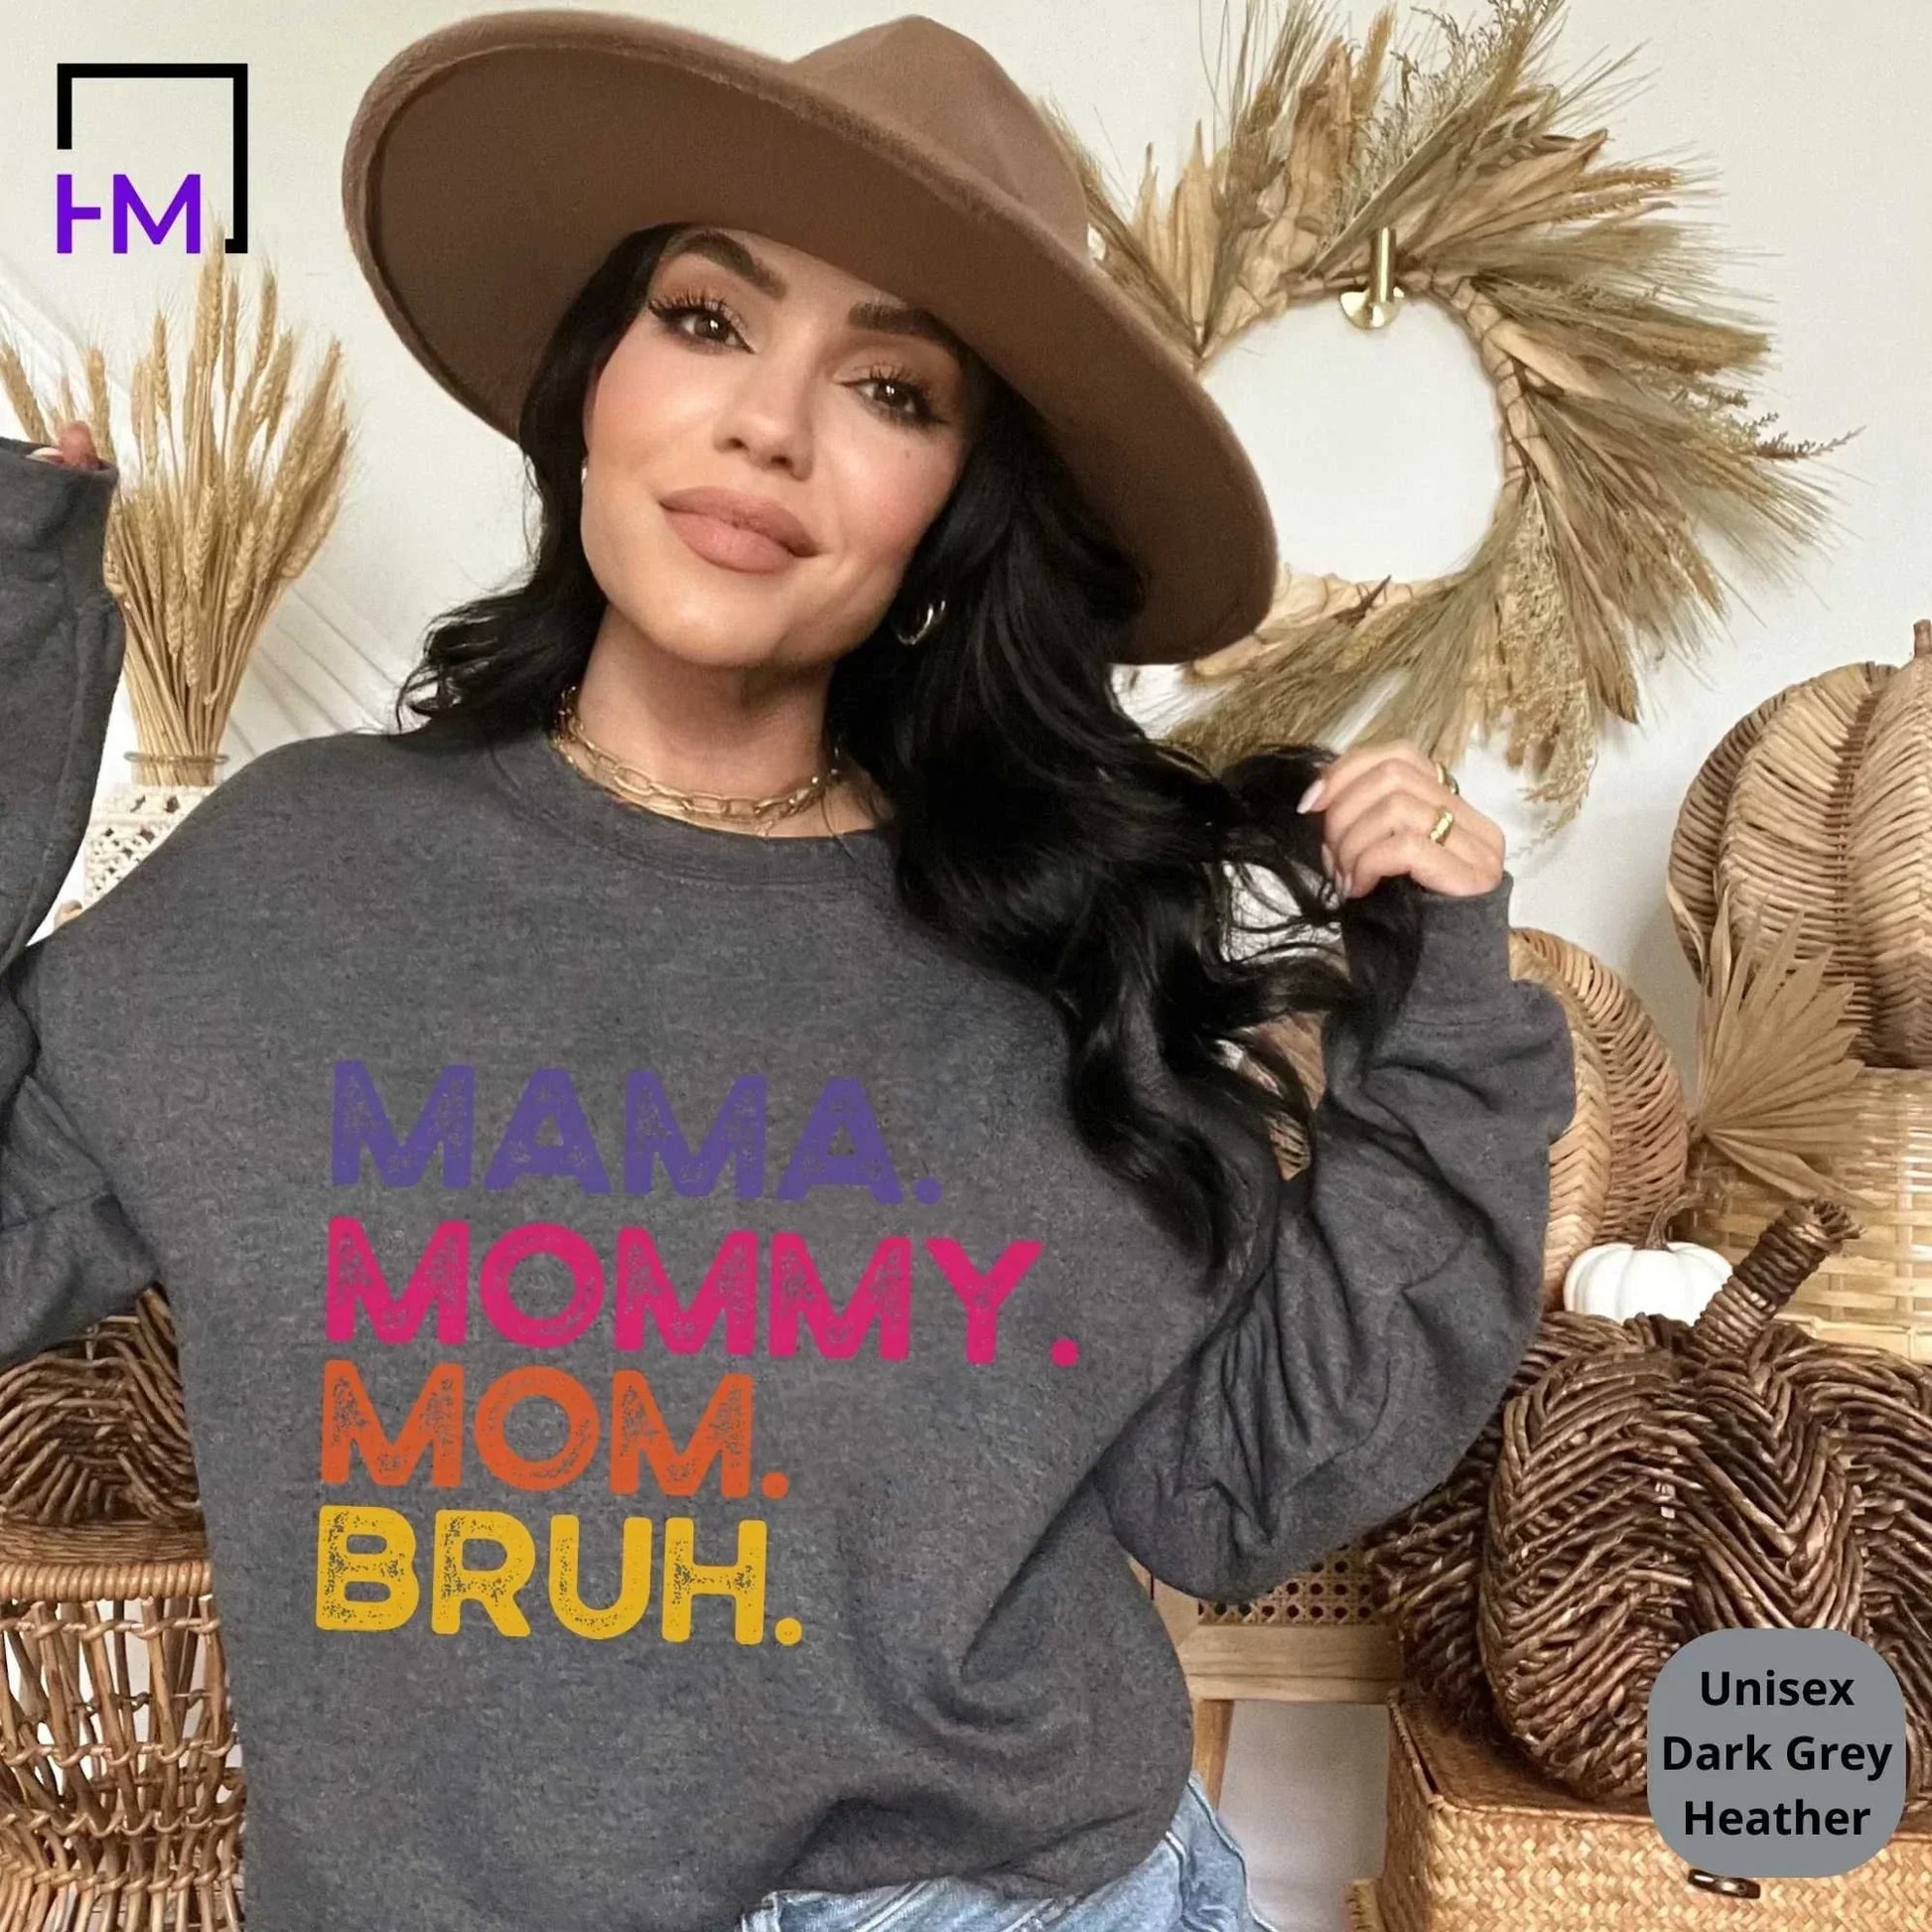 Mommy. Mama. Mom. Bruh. Mom Life Shirt, Perfect Mother's Day Gift for Busy Moms HMDesignStudioUS